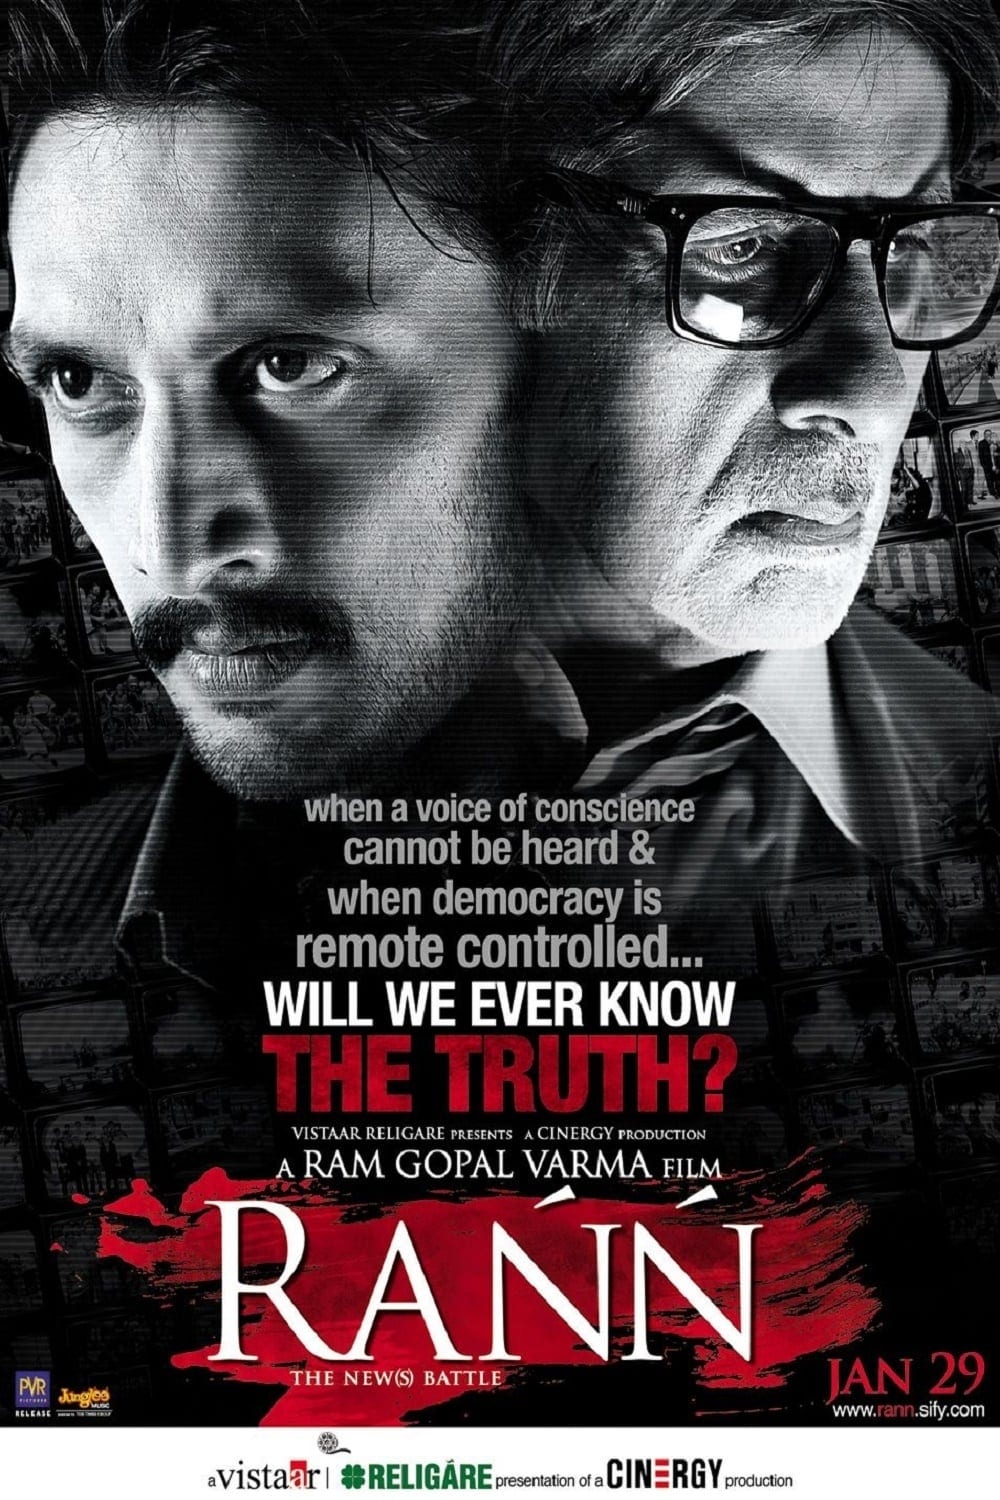 Poster for the movie "Rann"